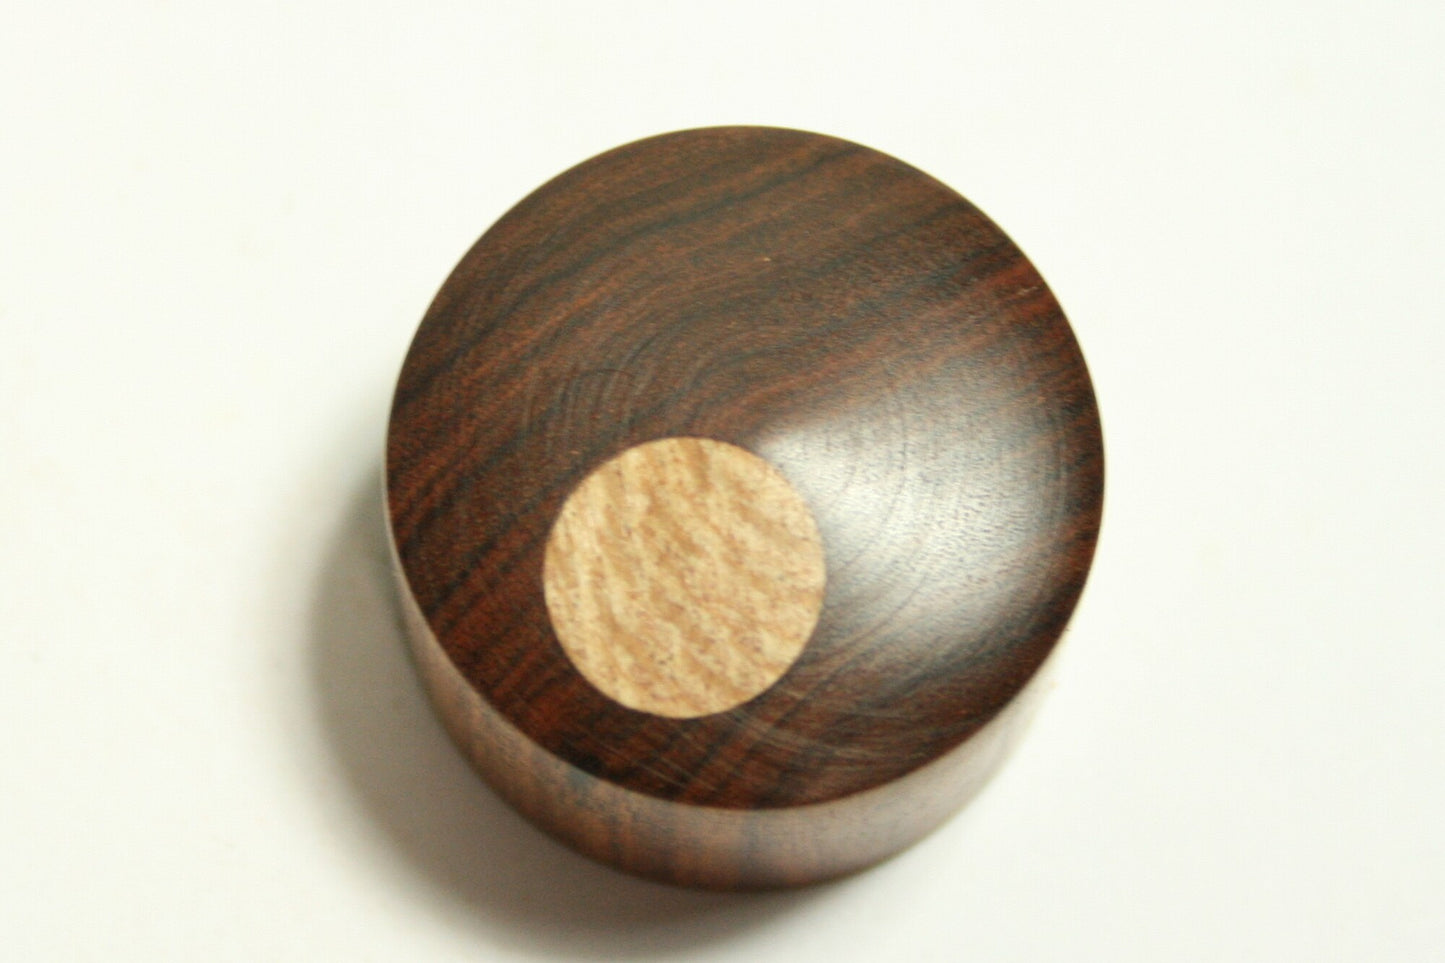 Guitar Knob: Rosewood with Large Sycamore Cap (15/16 dia x 11/16 height)